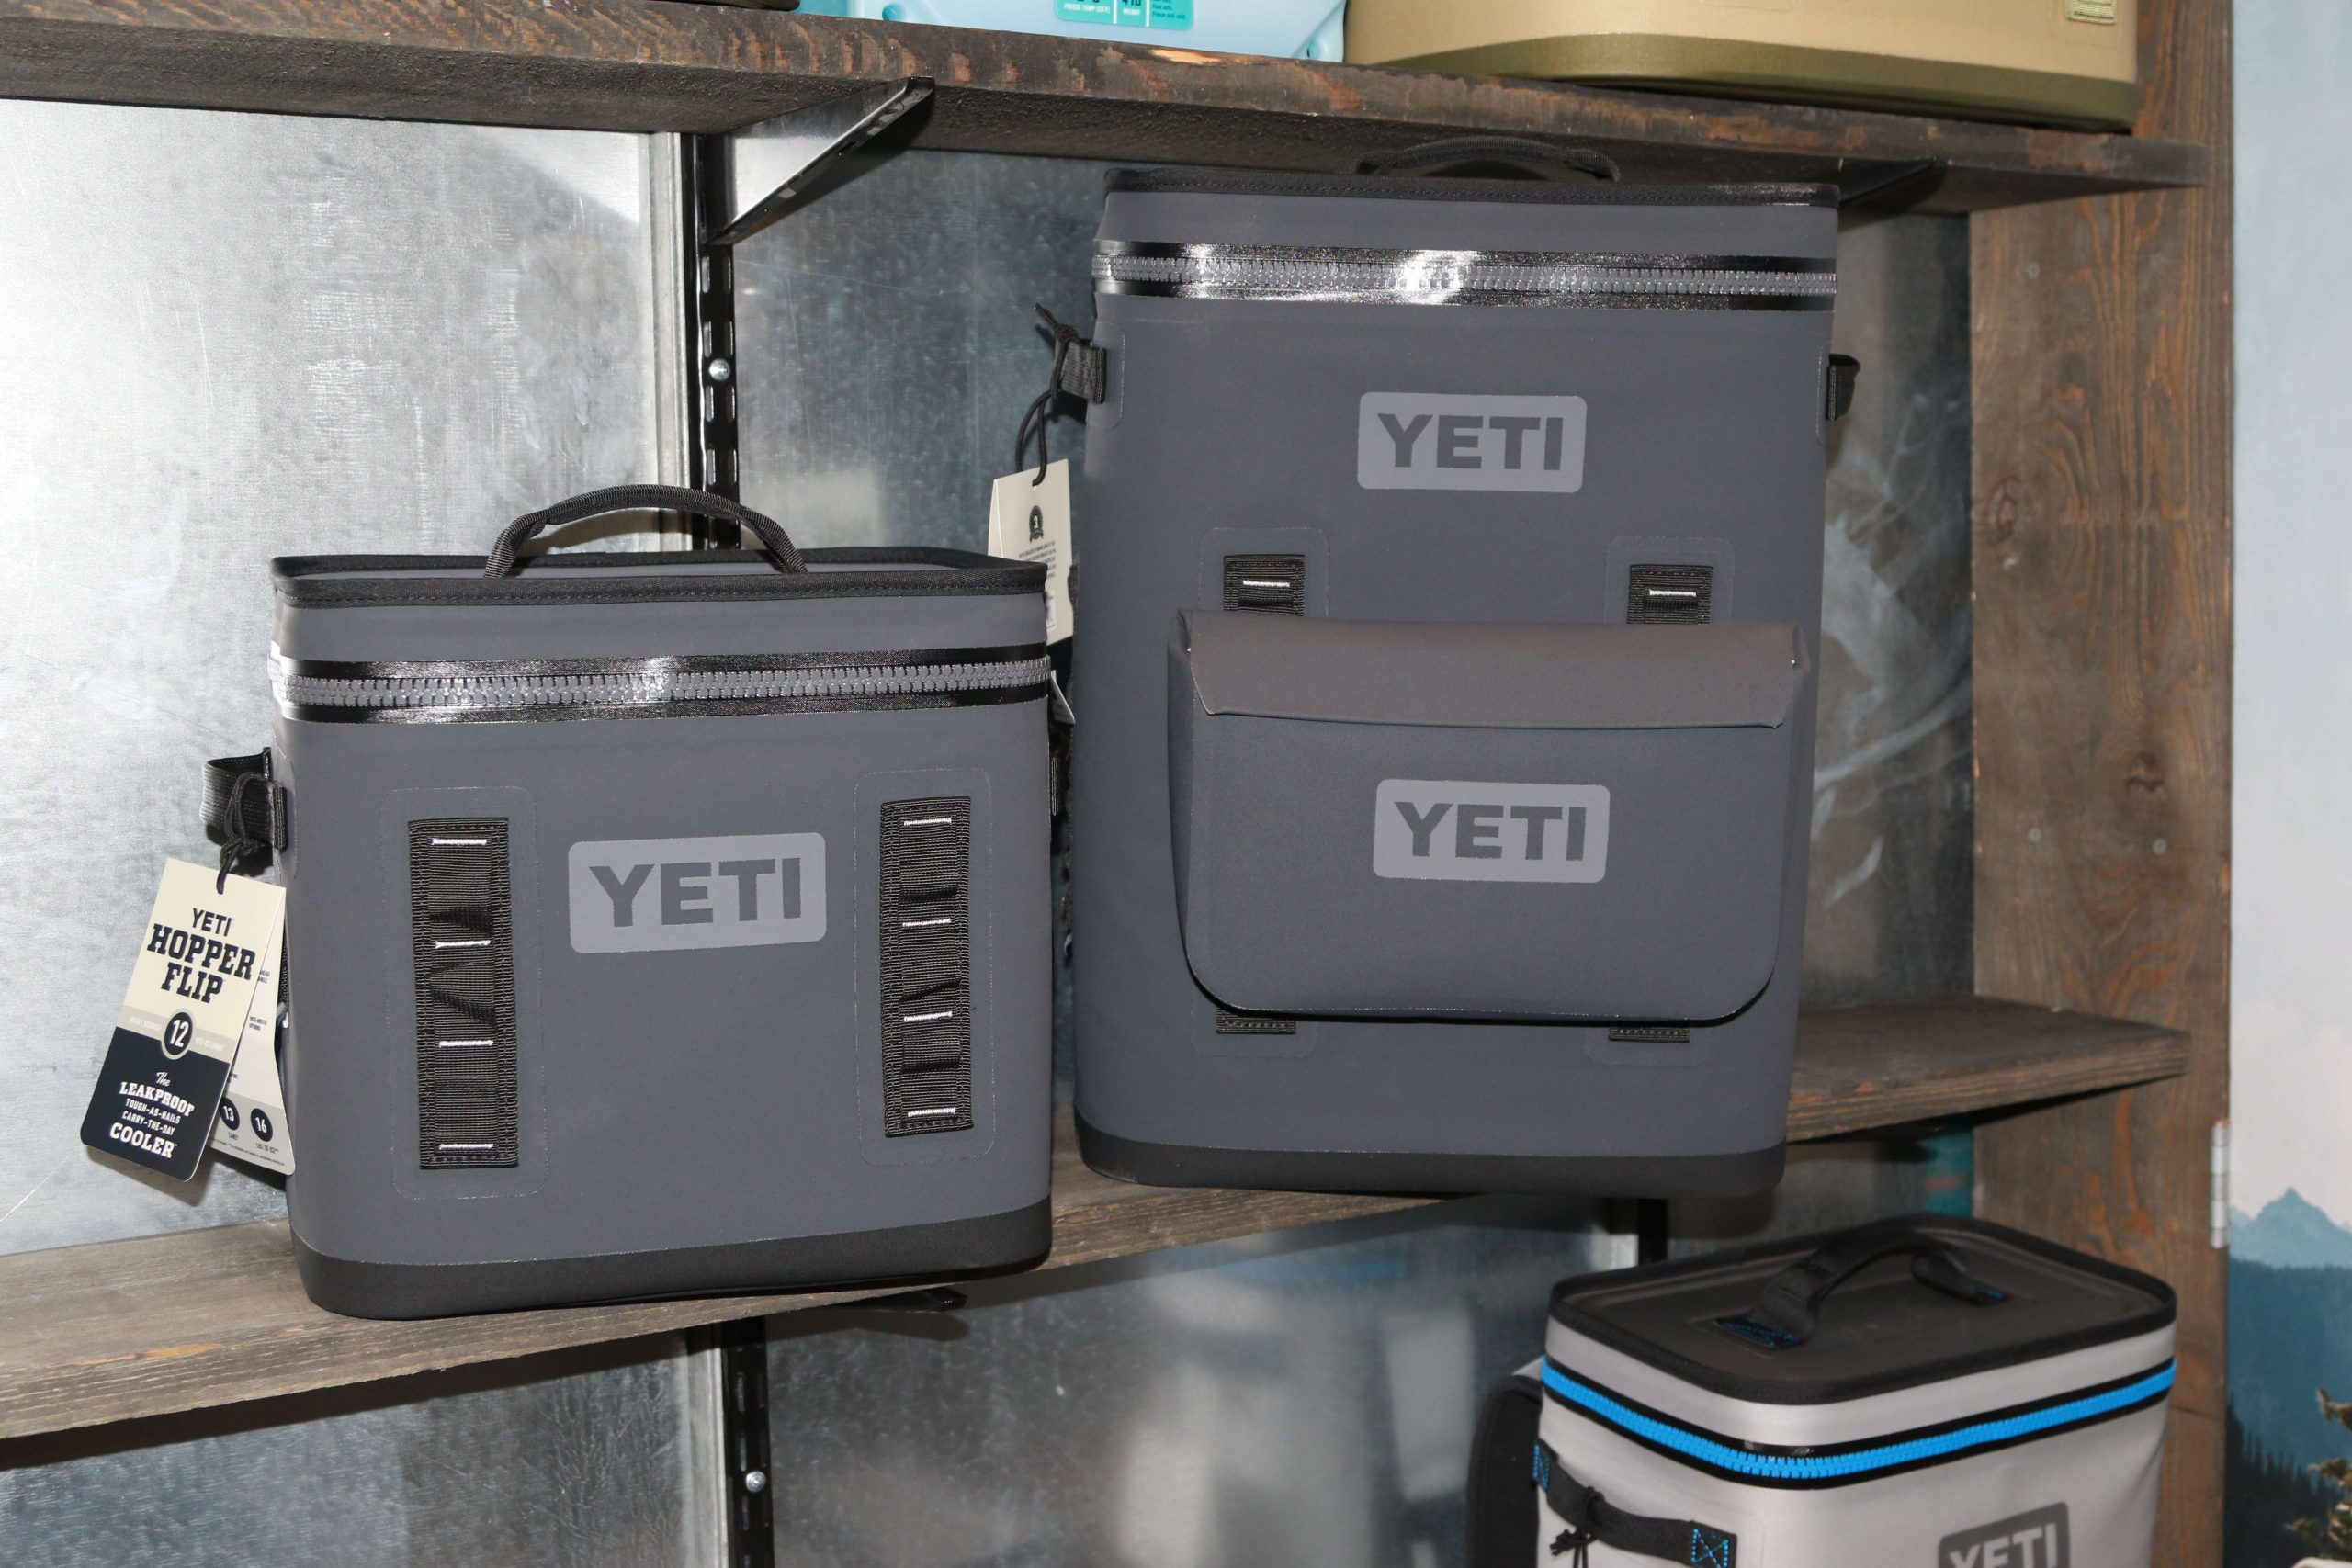 Charcoal gray is the newest release for the YETI Hopper series.